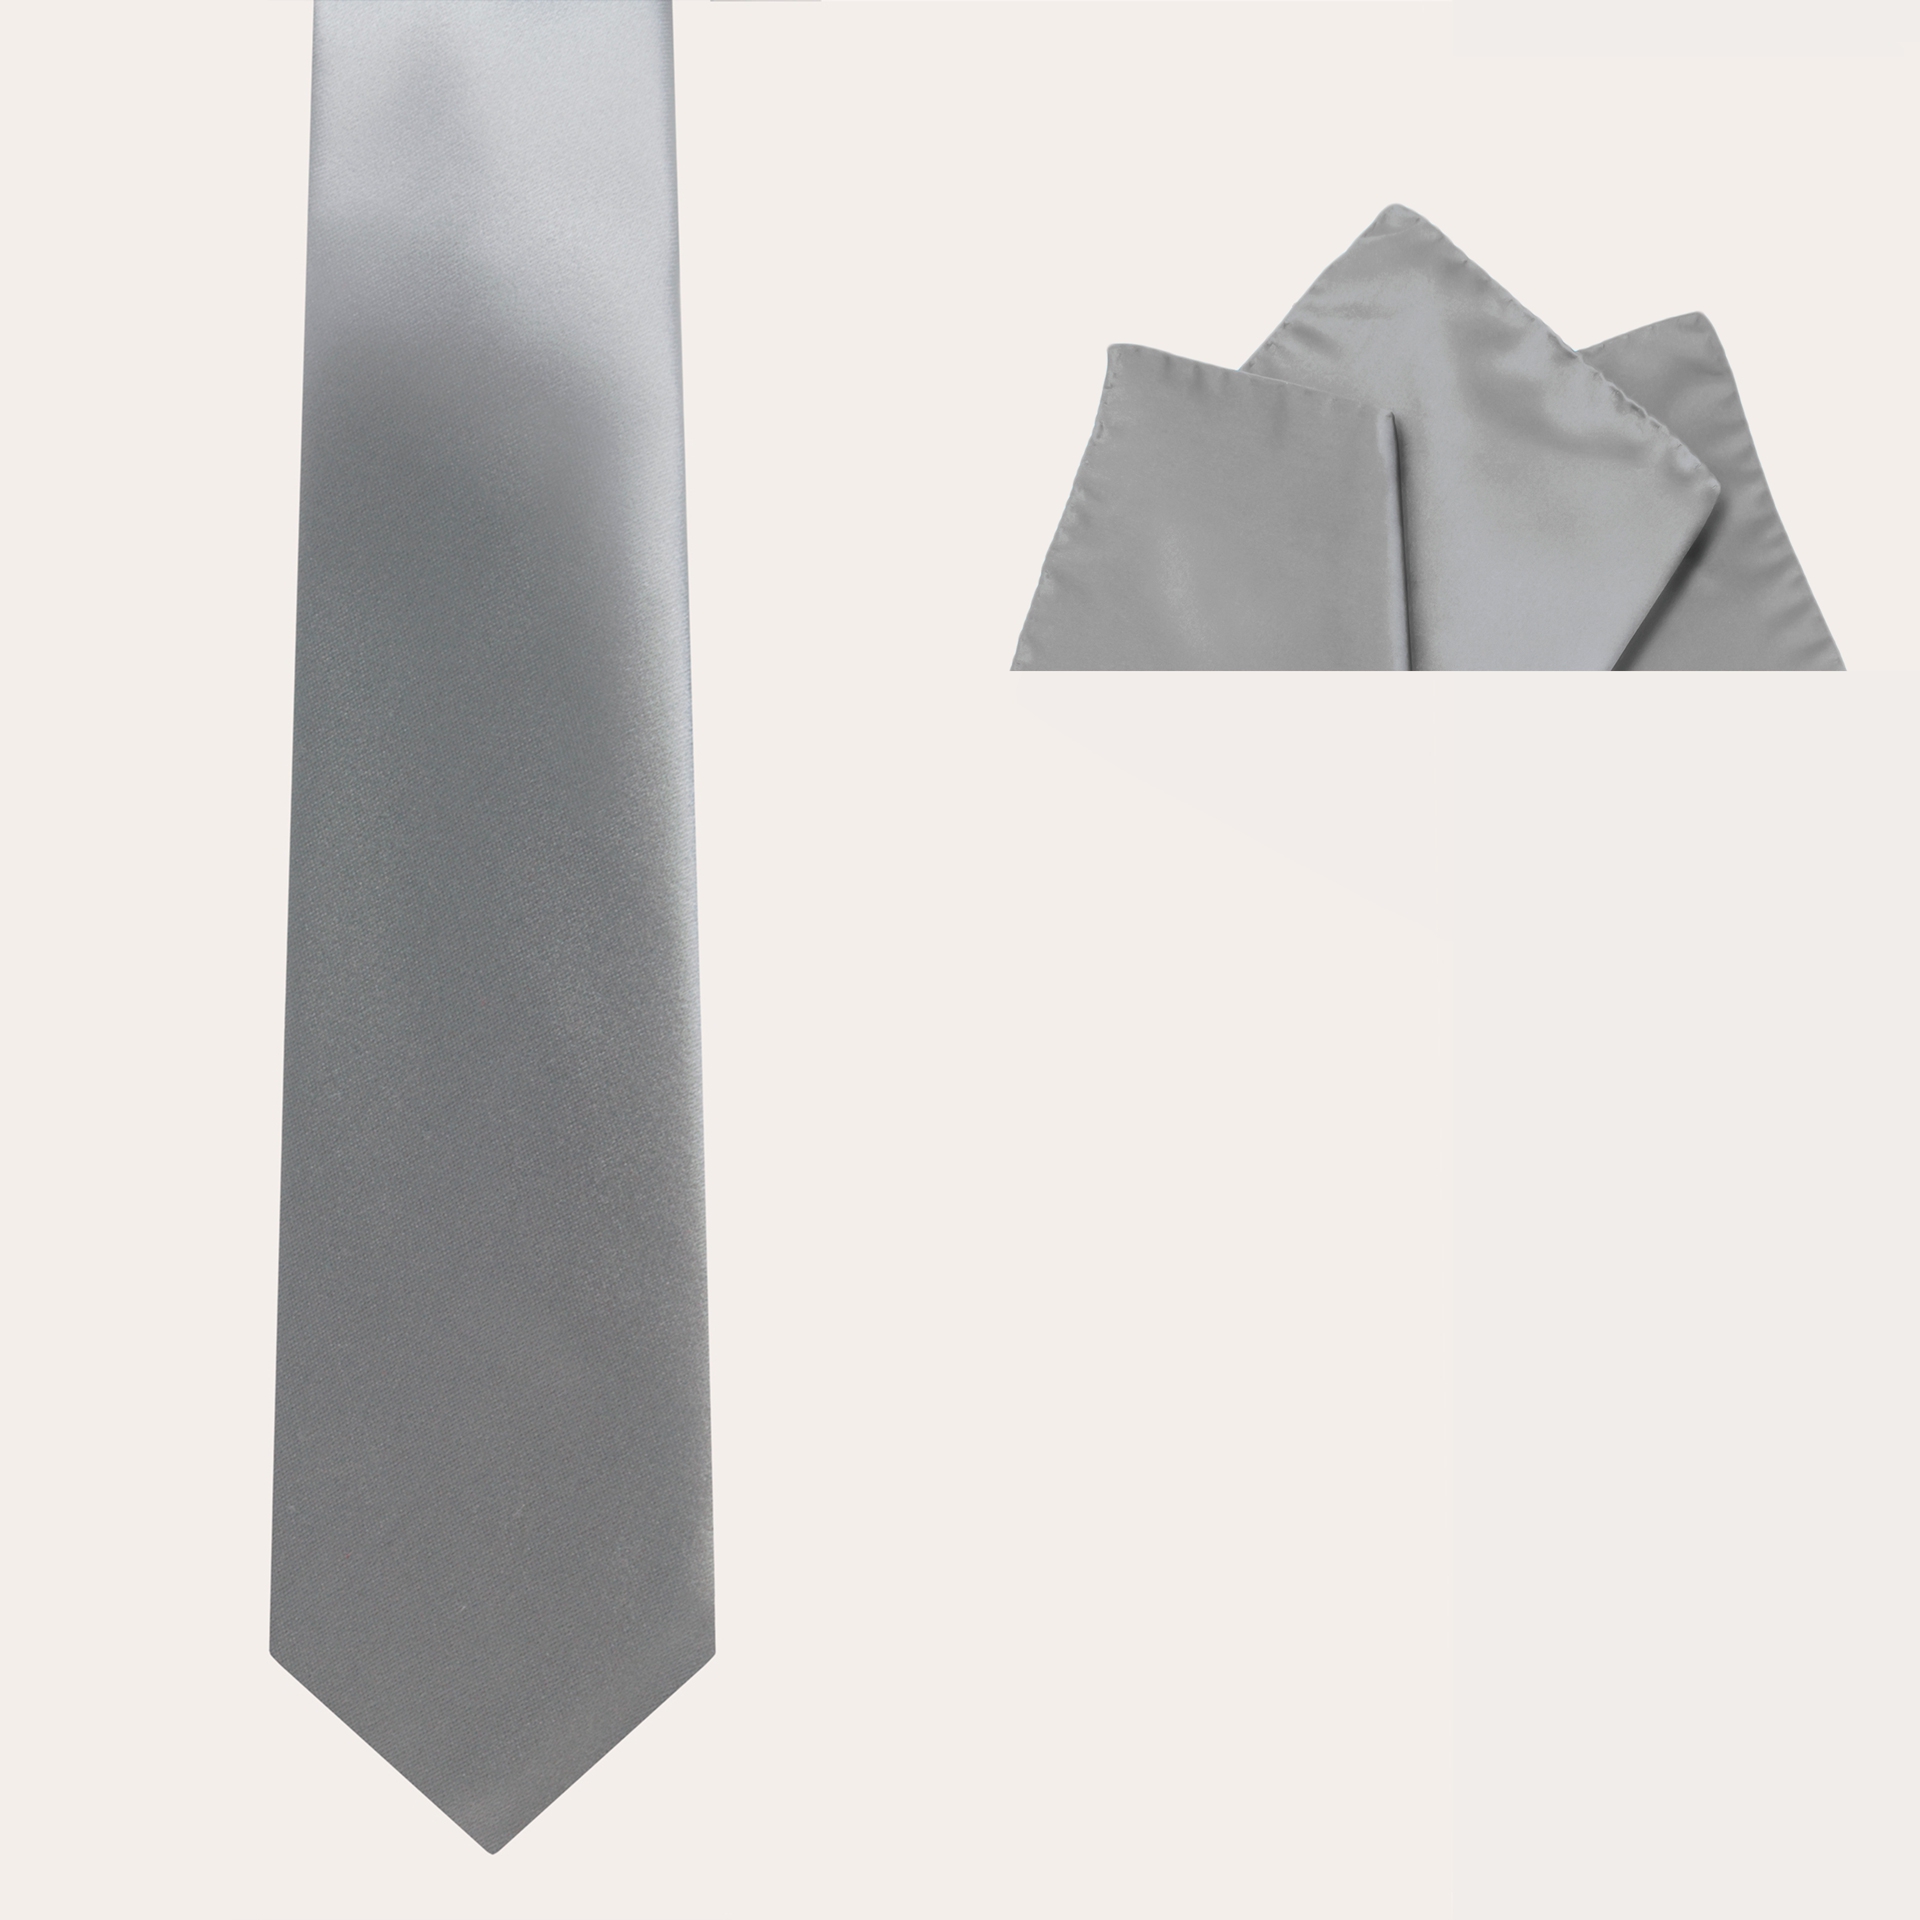 BRUCLE Silk satin ceremony set, grey tie and pocket square